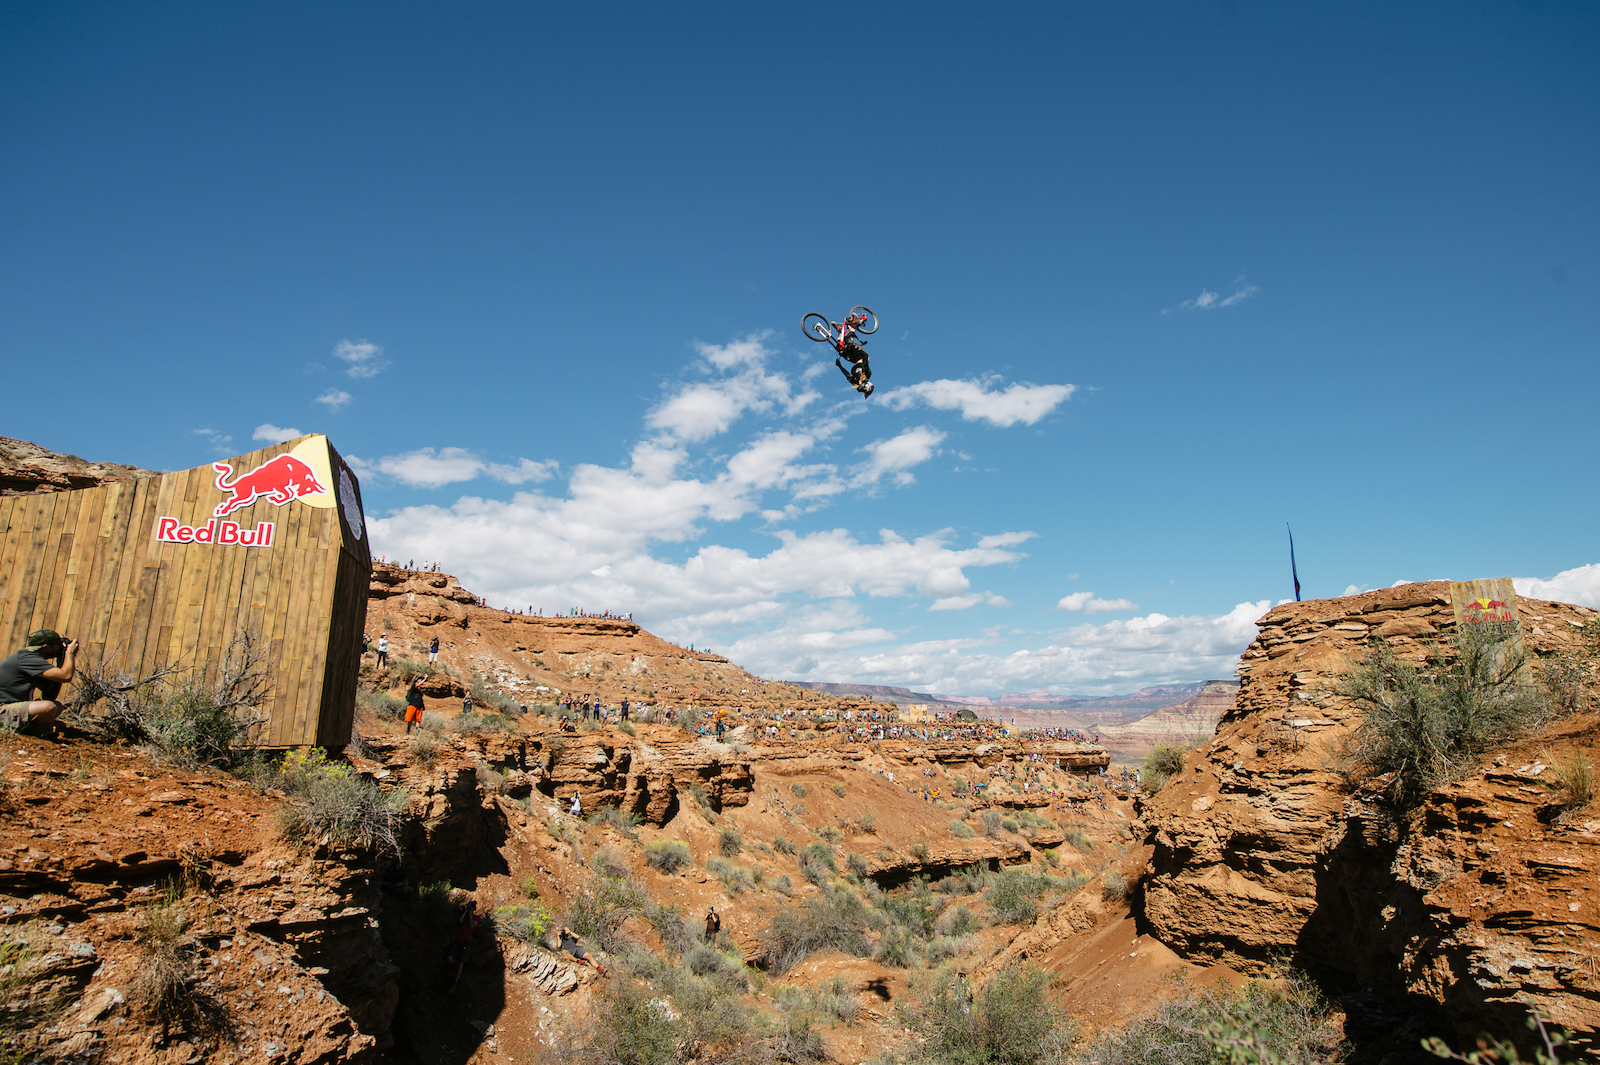 Kelly flipping the canyon gap for the third time in his life. This time less catastrophic and coming up short.